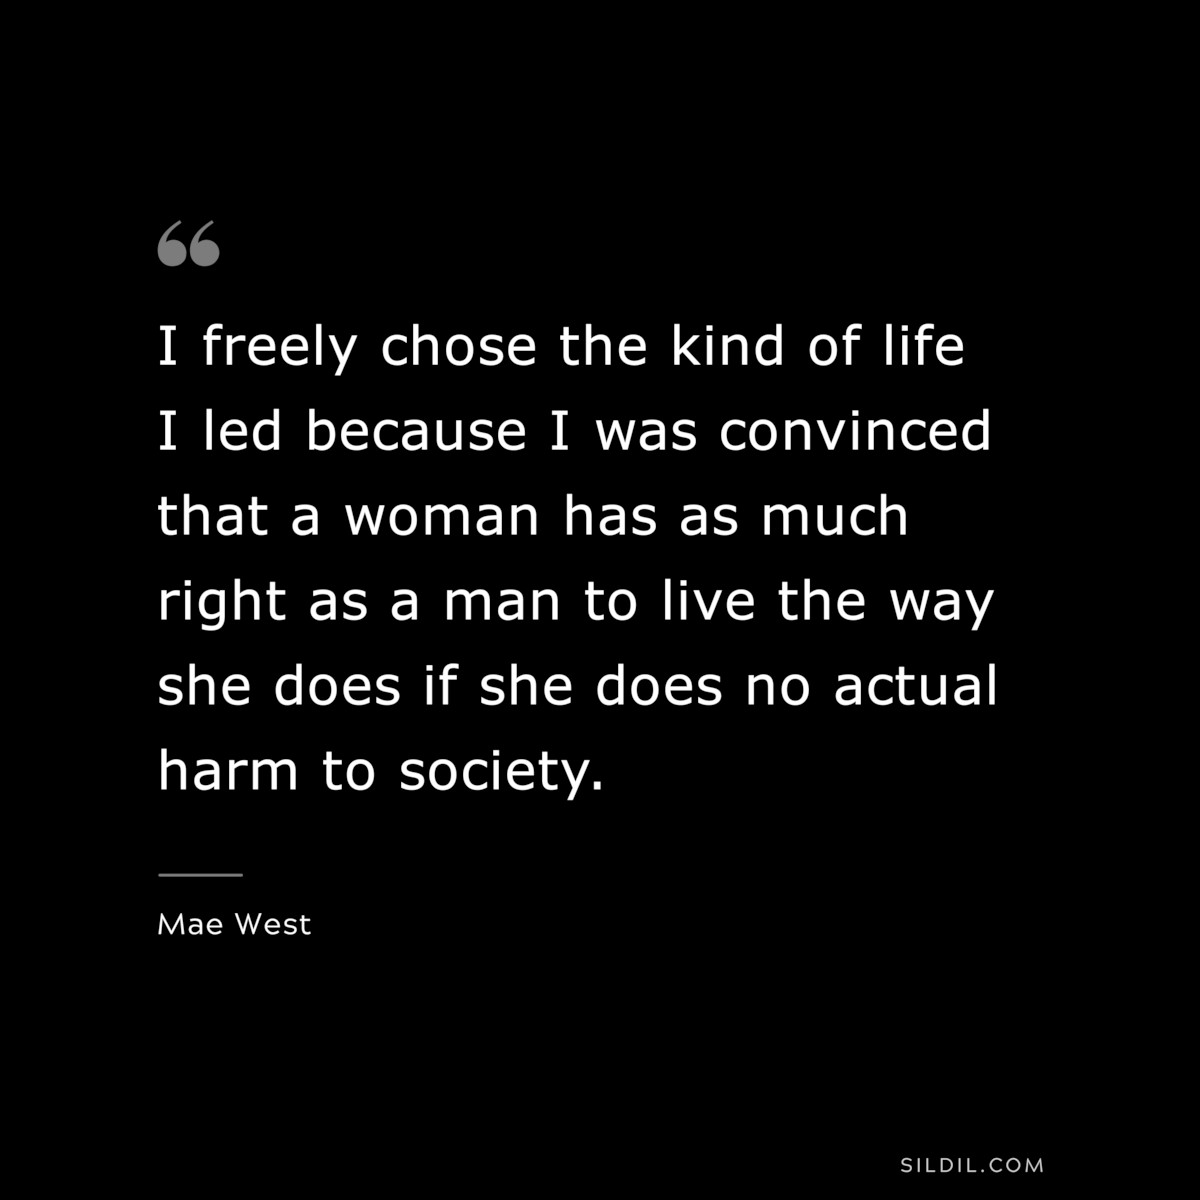 I freely chose the kind of life I led because I was convinced that a woman has as much right as a man to live the way she does if she does no actual harm to society. ― Mae West